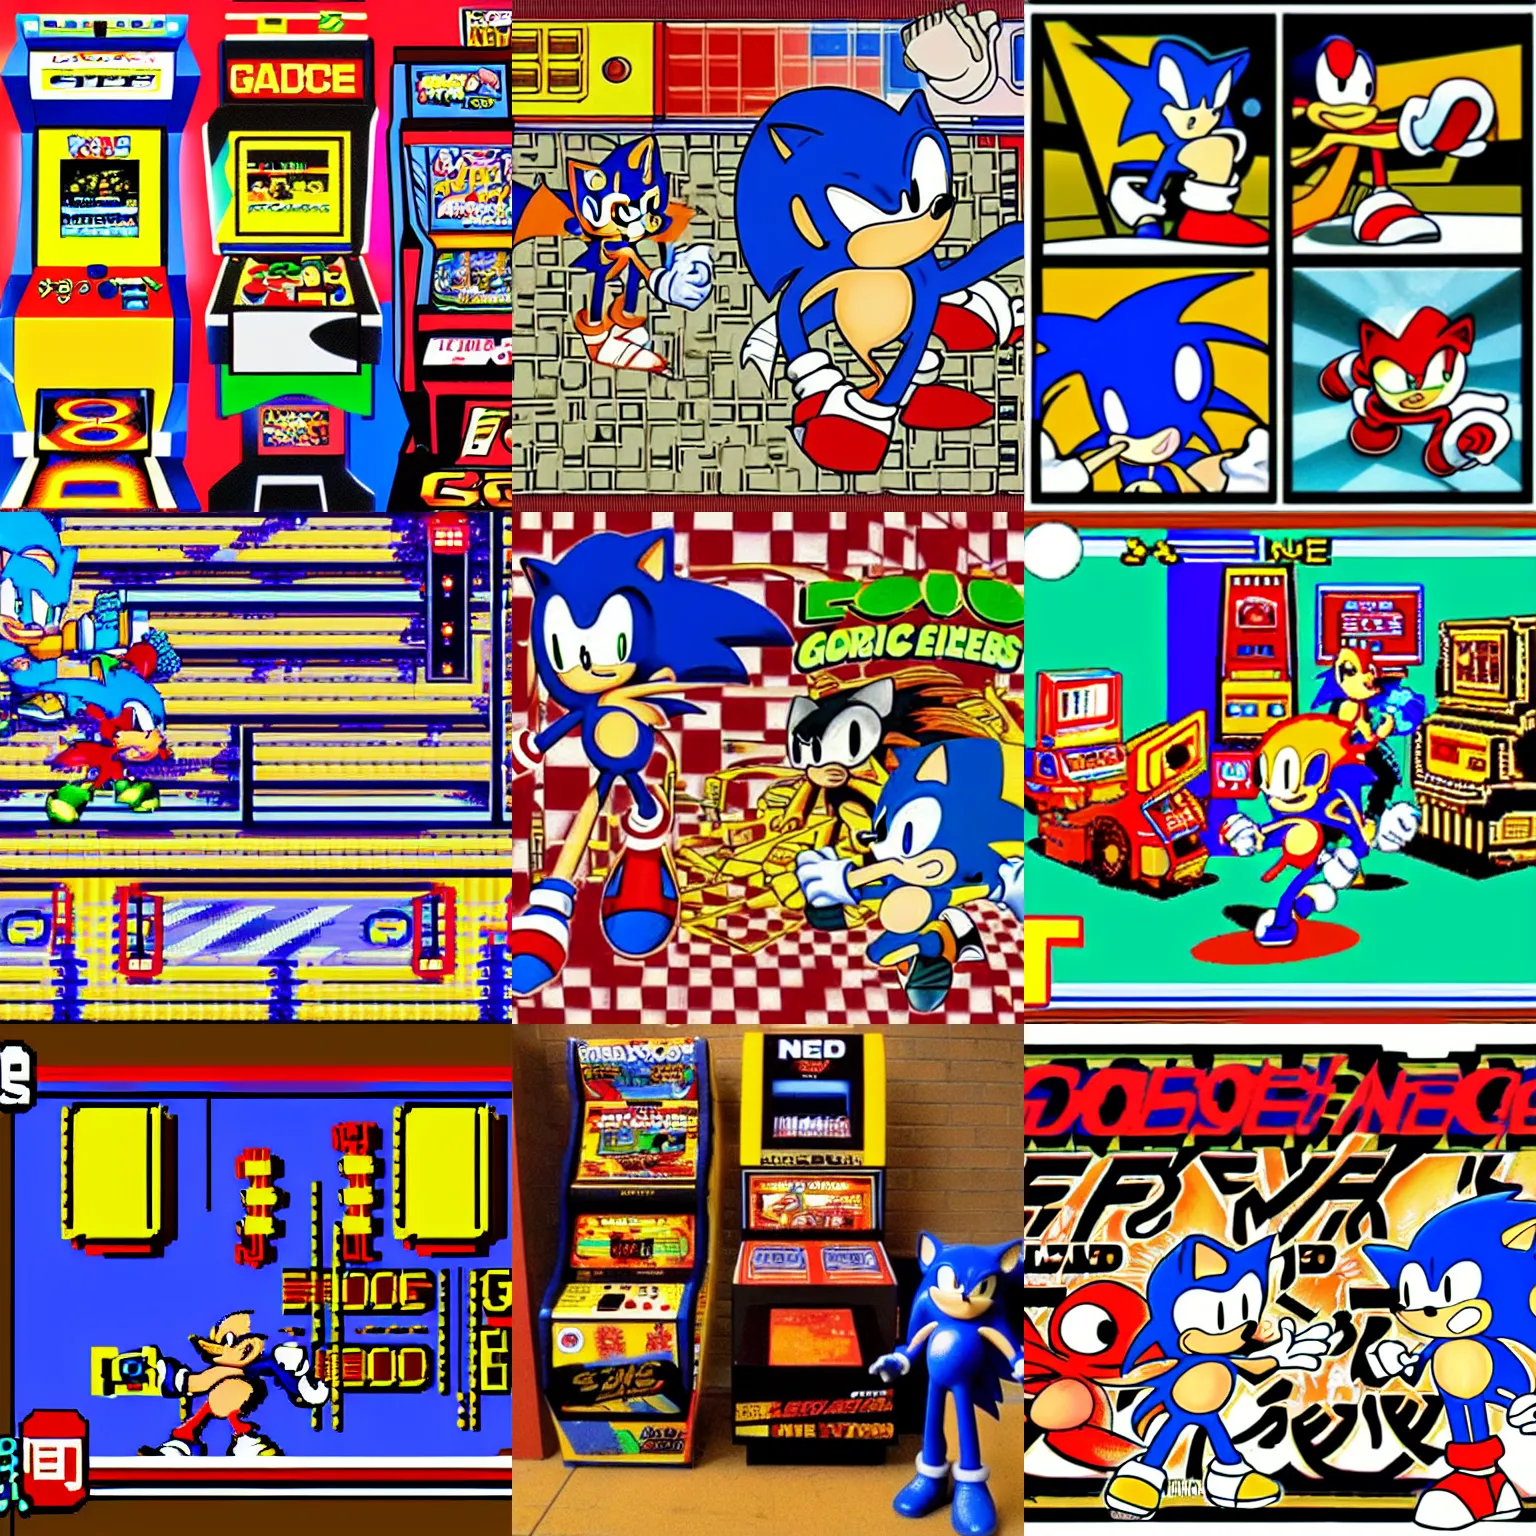 a sprite sheet for Sonic the Hedgehog, pixel art, 1993, Stable Diffusion